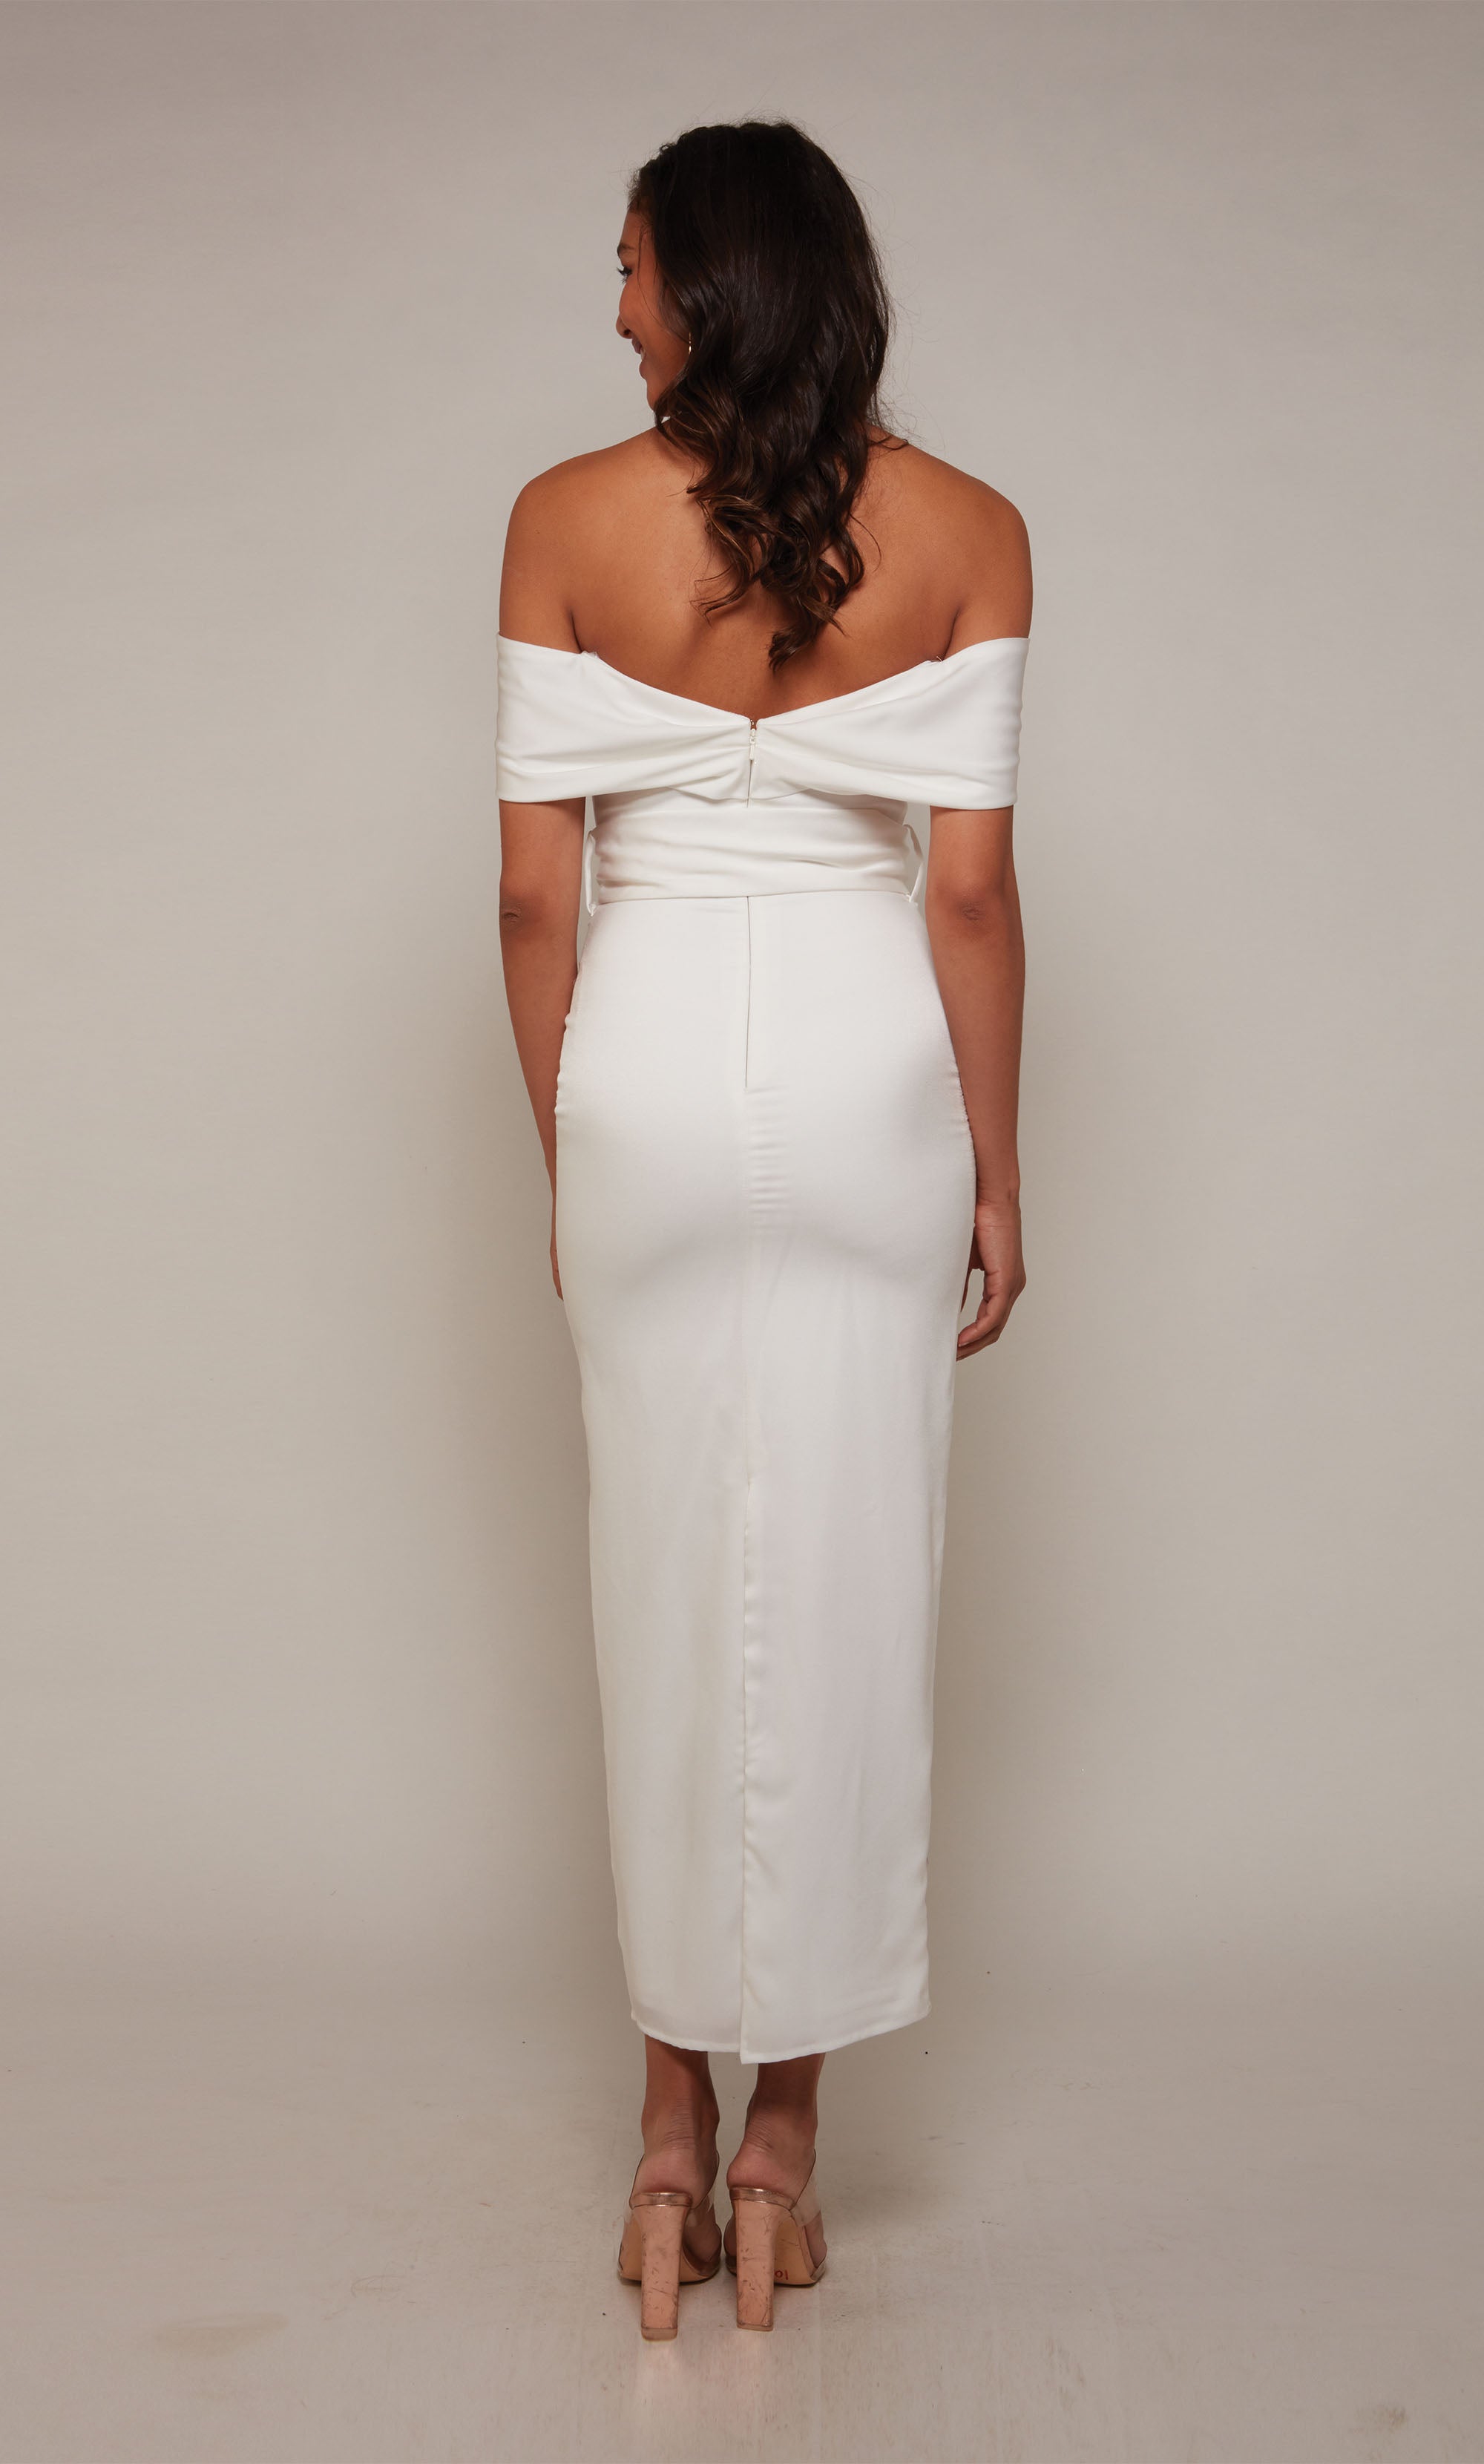 A  white, satin midi dress with an off the shoulder neckline and thick belt at the waistline. The skirt is a fitted pencil skirt with a back slit.